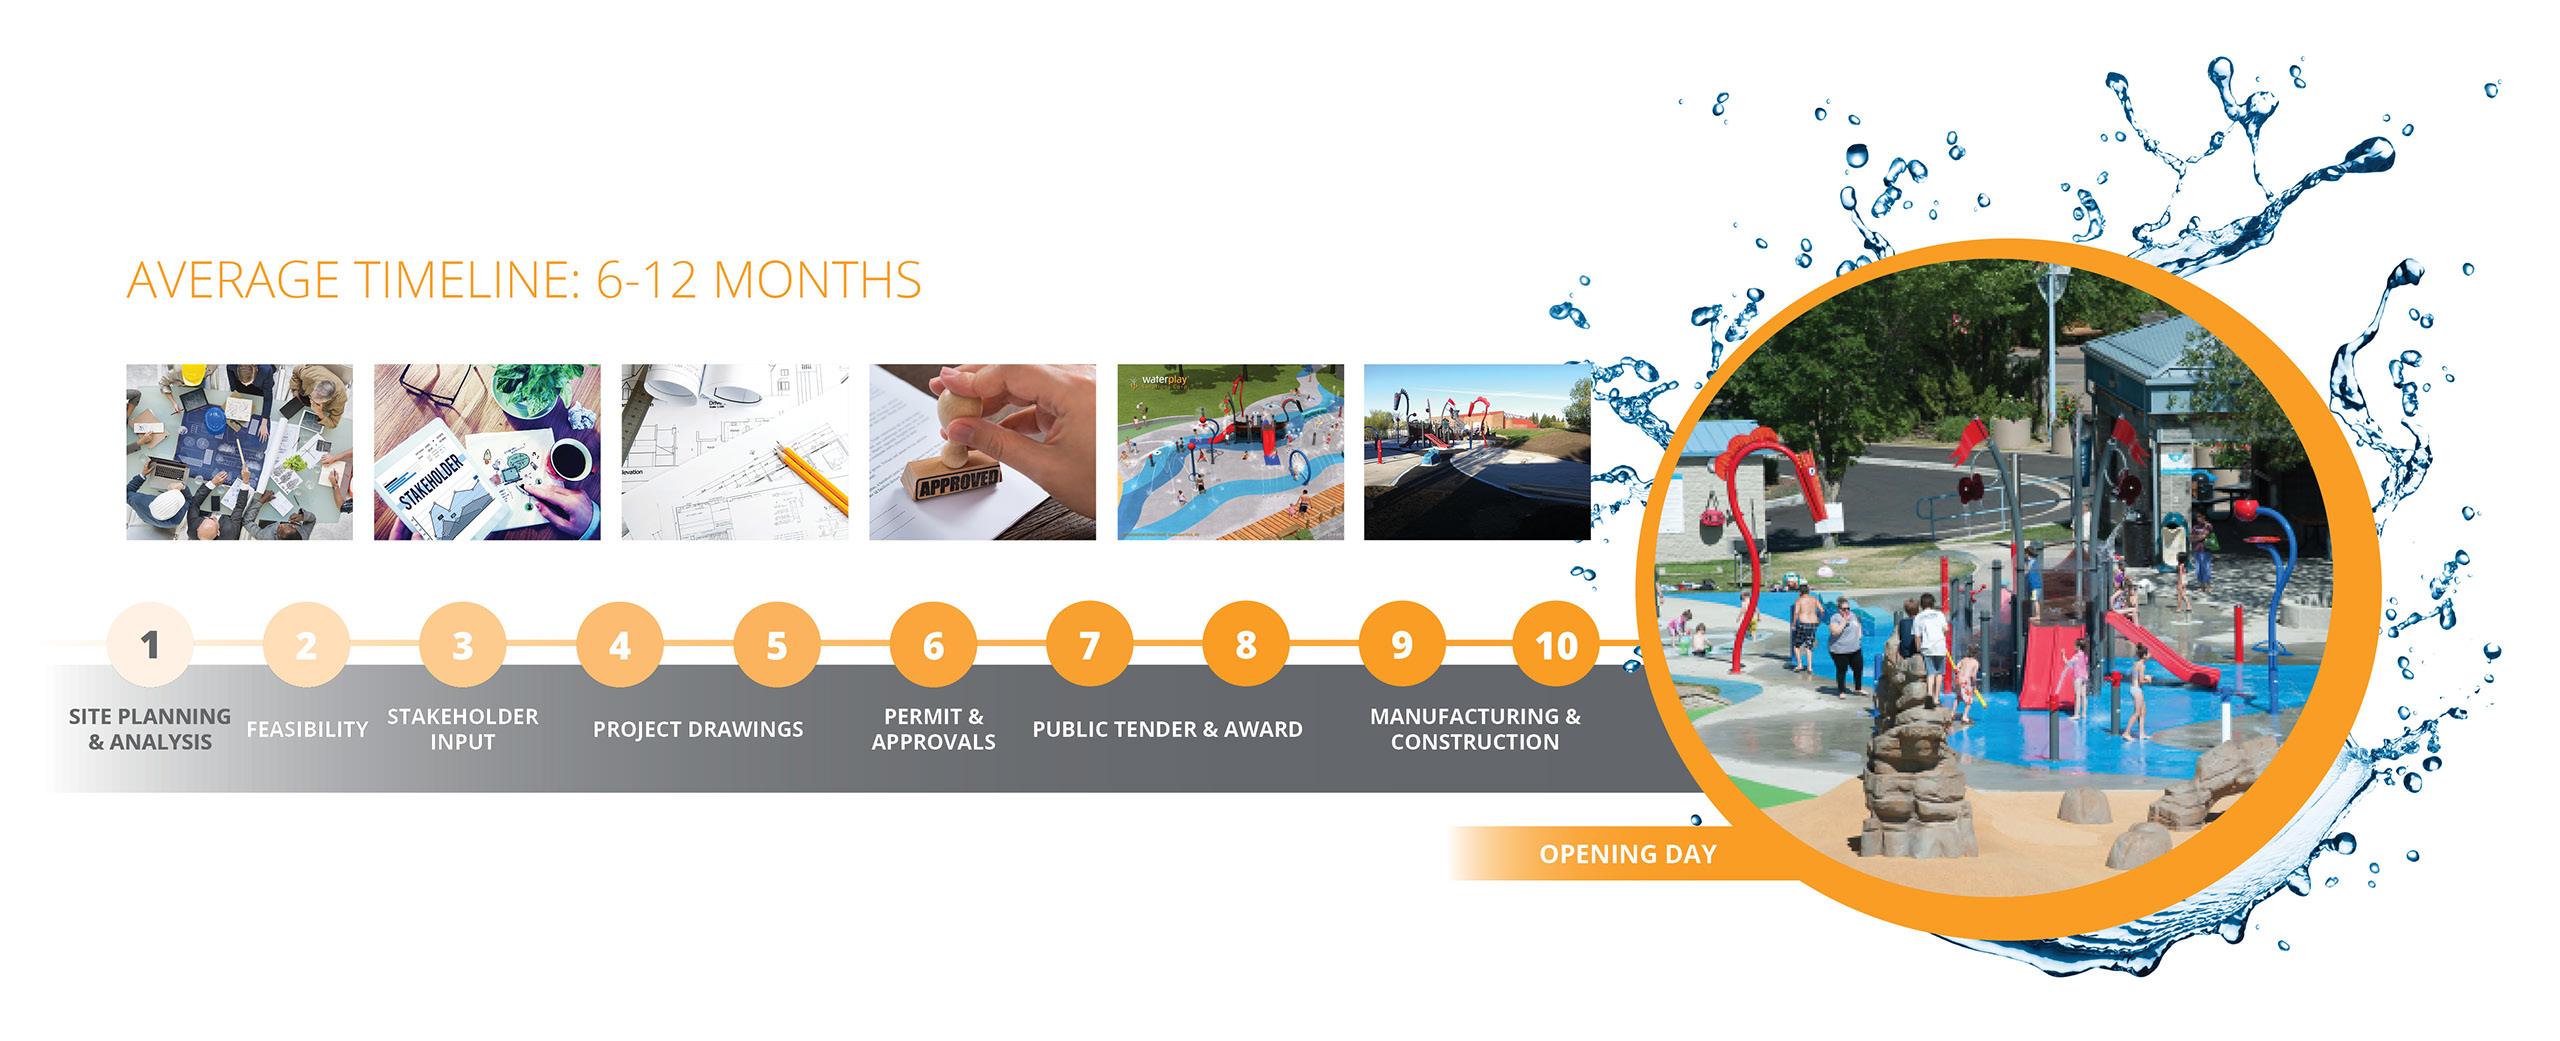 10-Step Guide for planning a Community Splash Pad